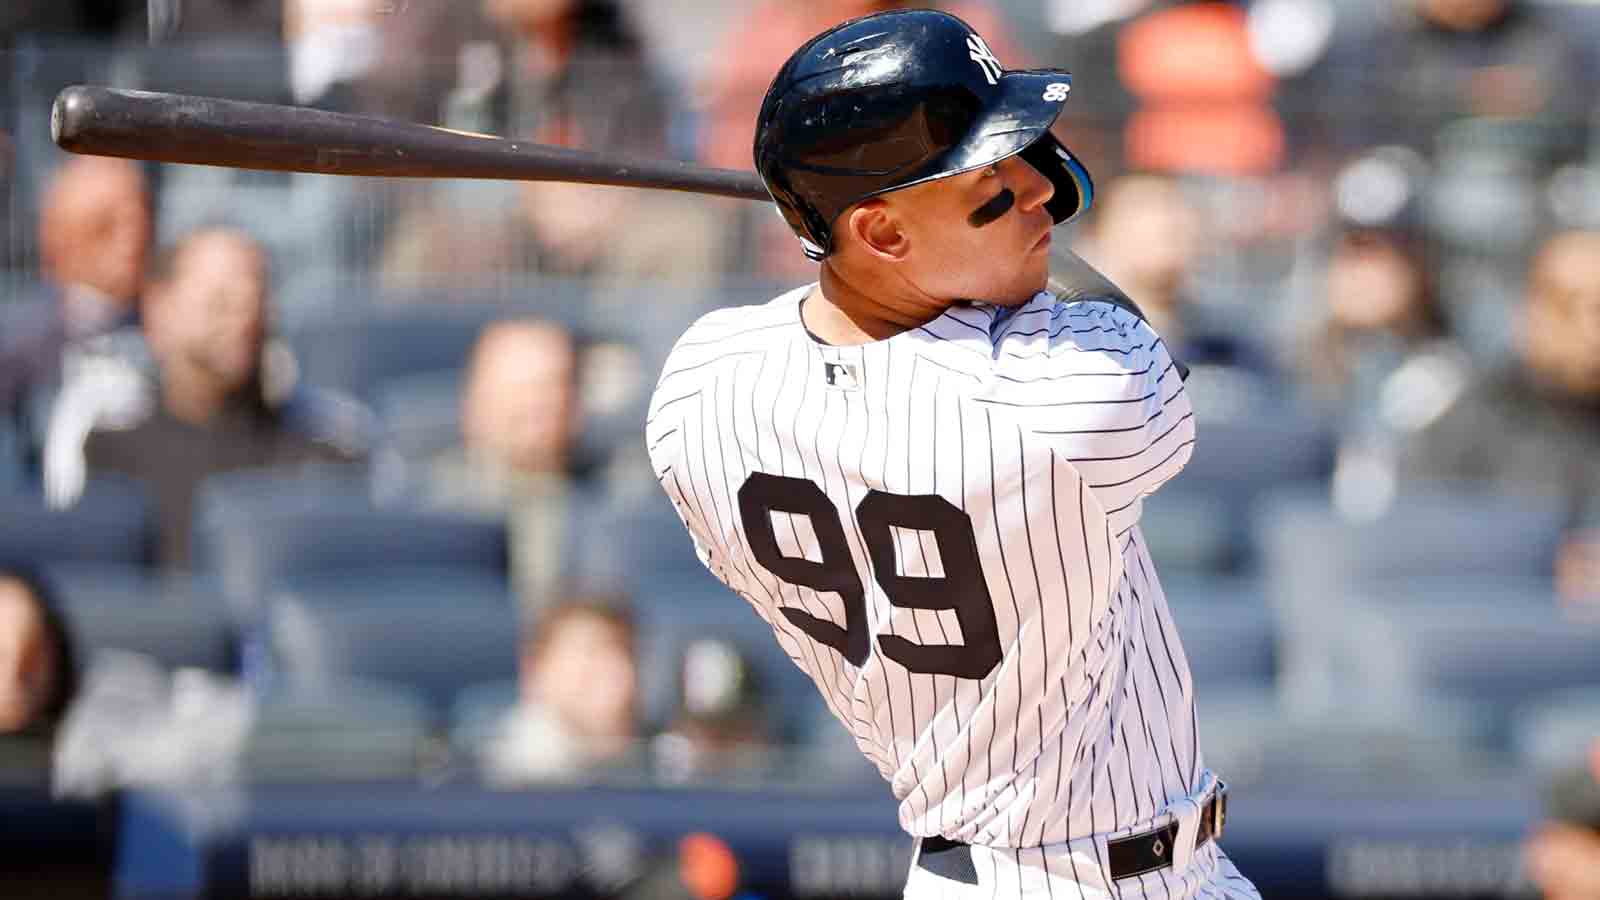 Aaron Judge spoof 'Arson Judge' jersey spotted at Yankees-Giants